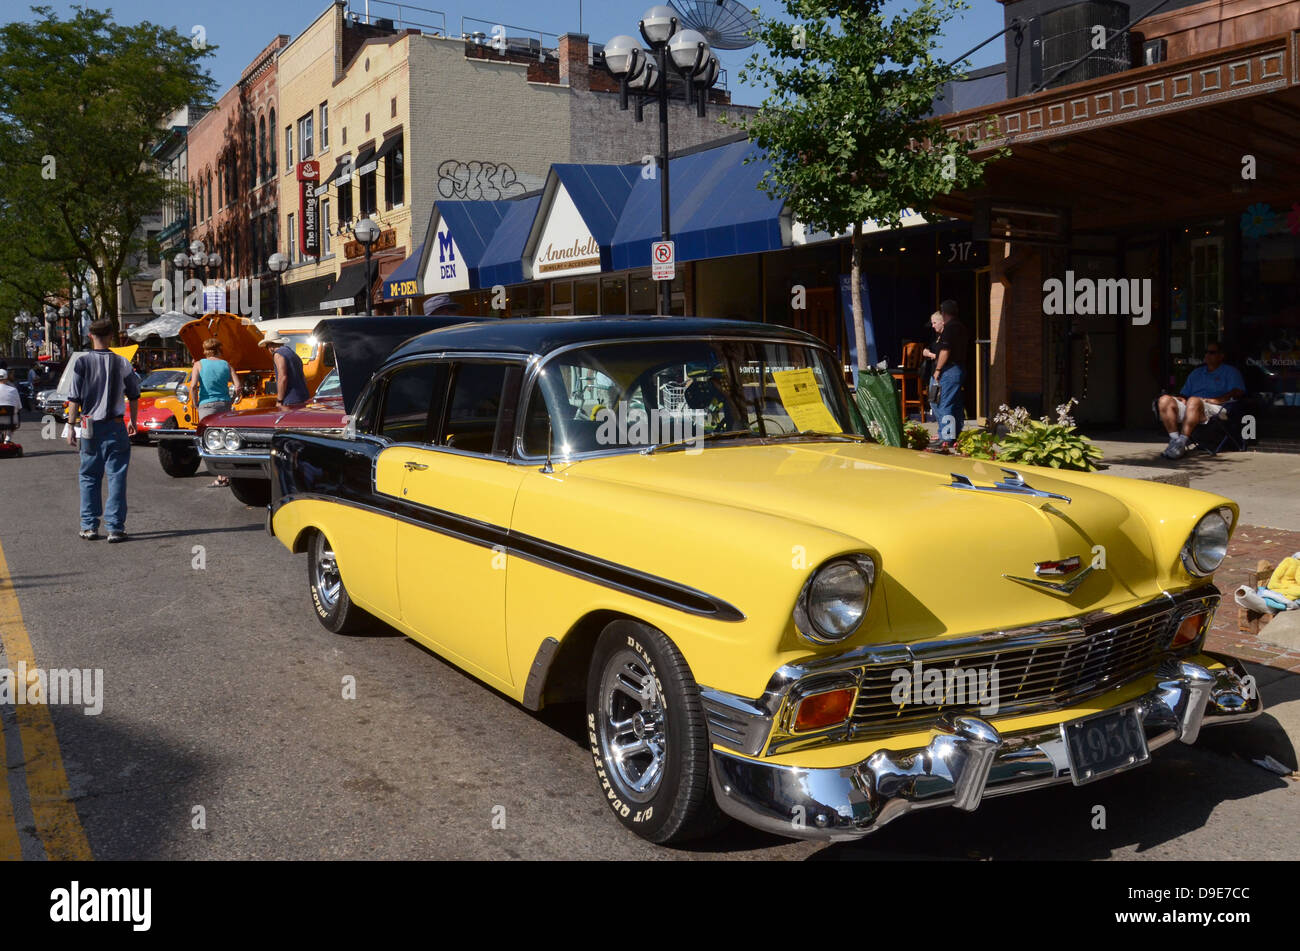 1956 Chevy Chevrolet Bel Air at the Rolling Sculpture car show July 13, 2012 in Ann Arbor, Michigan Stock Photo